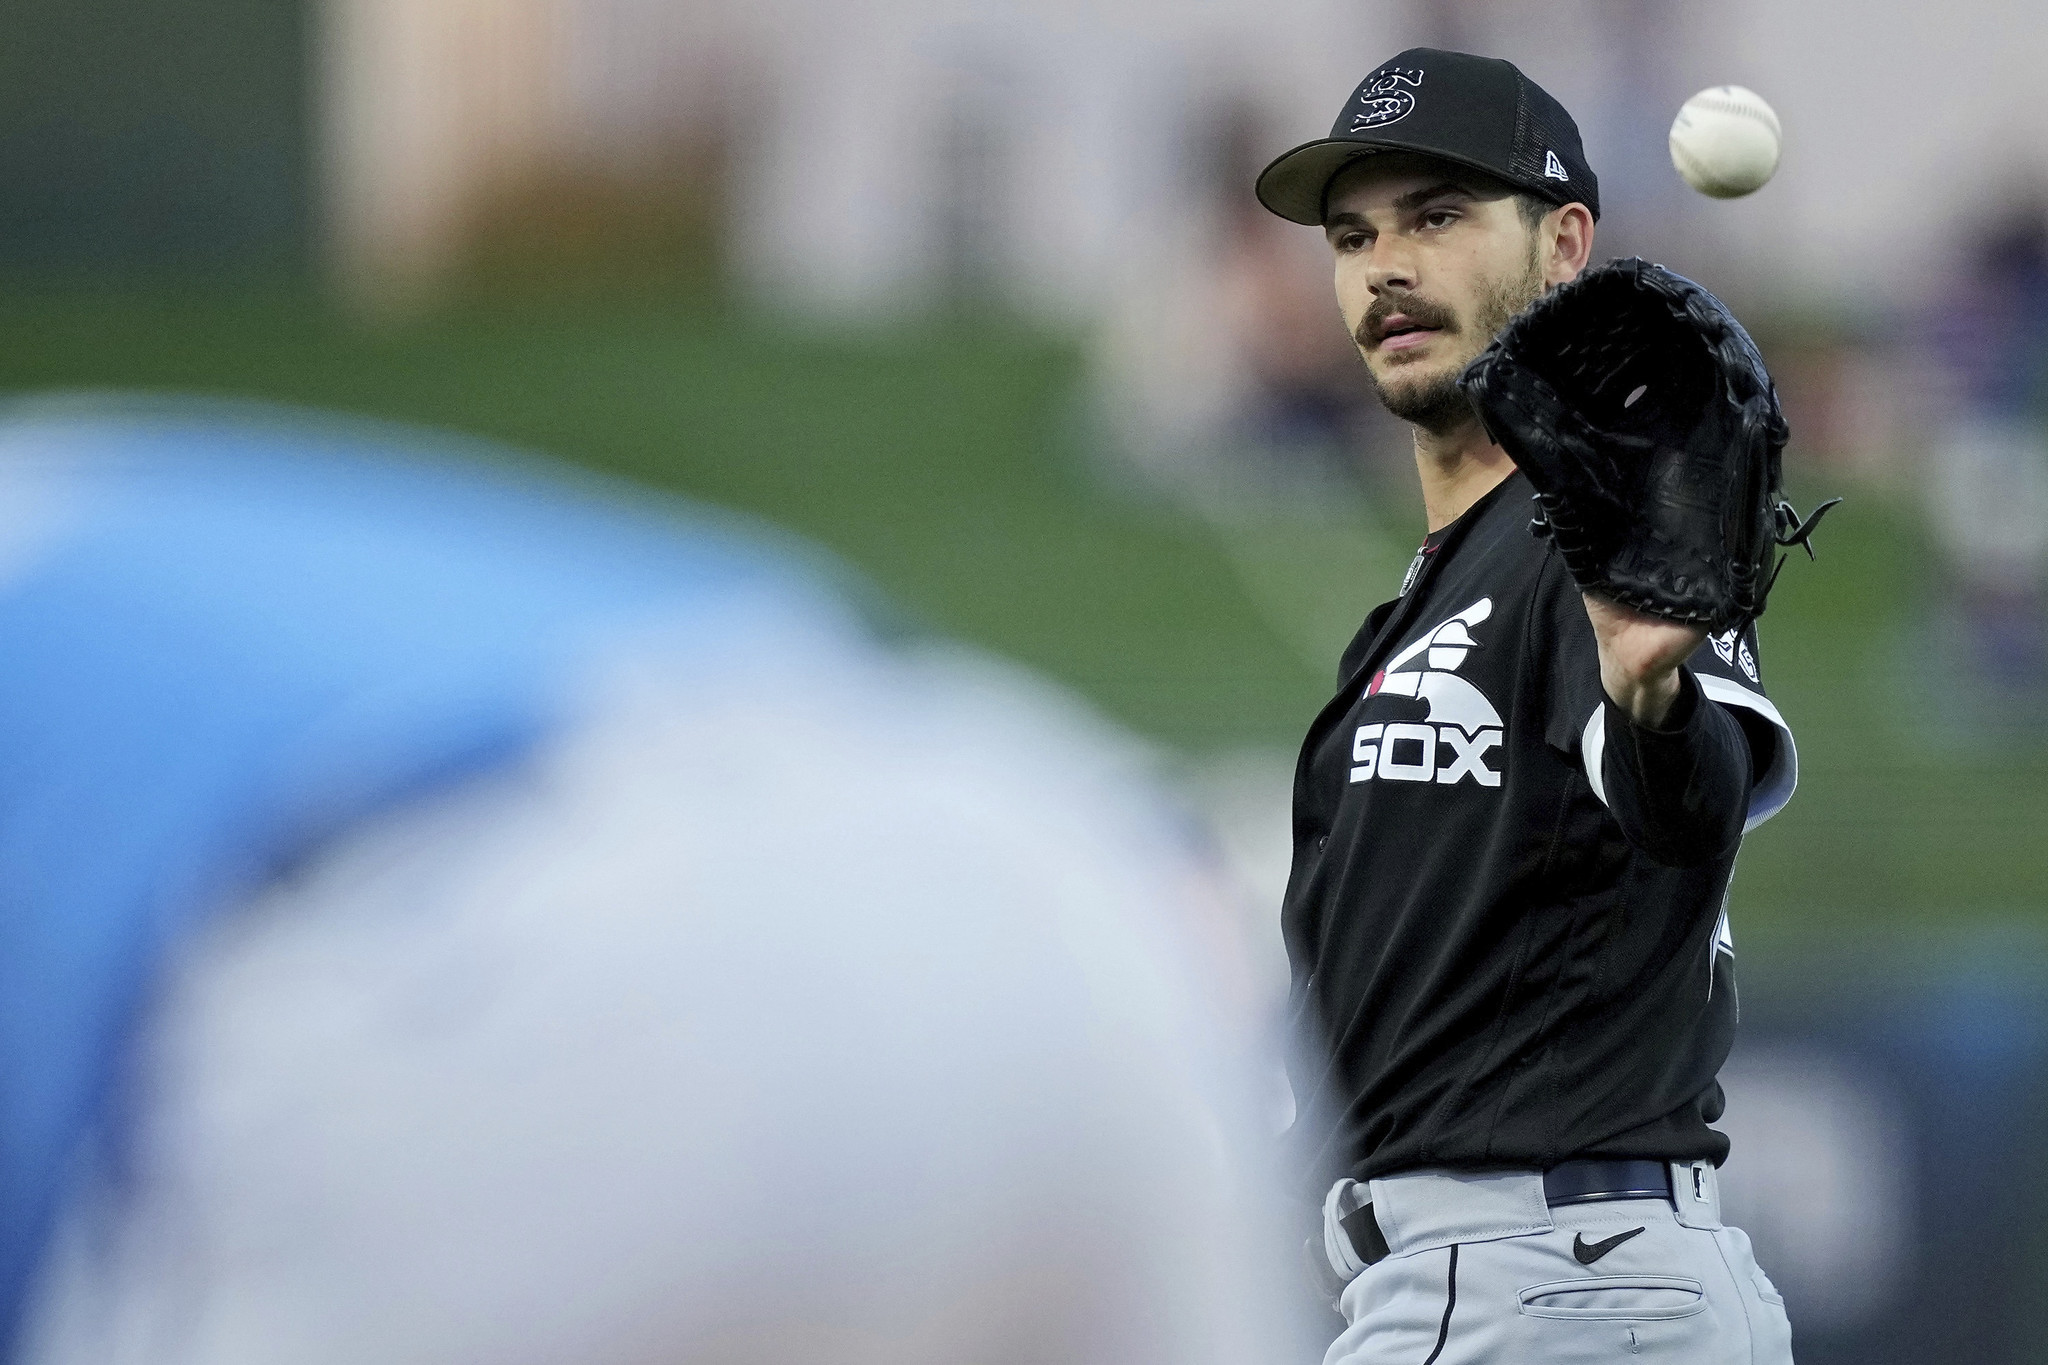 Dylan Cease: Chicago White Sox starter 'checked all the boxes